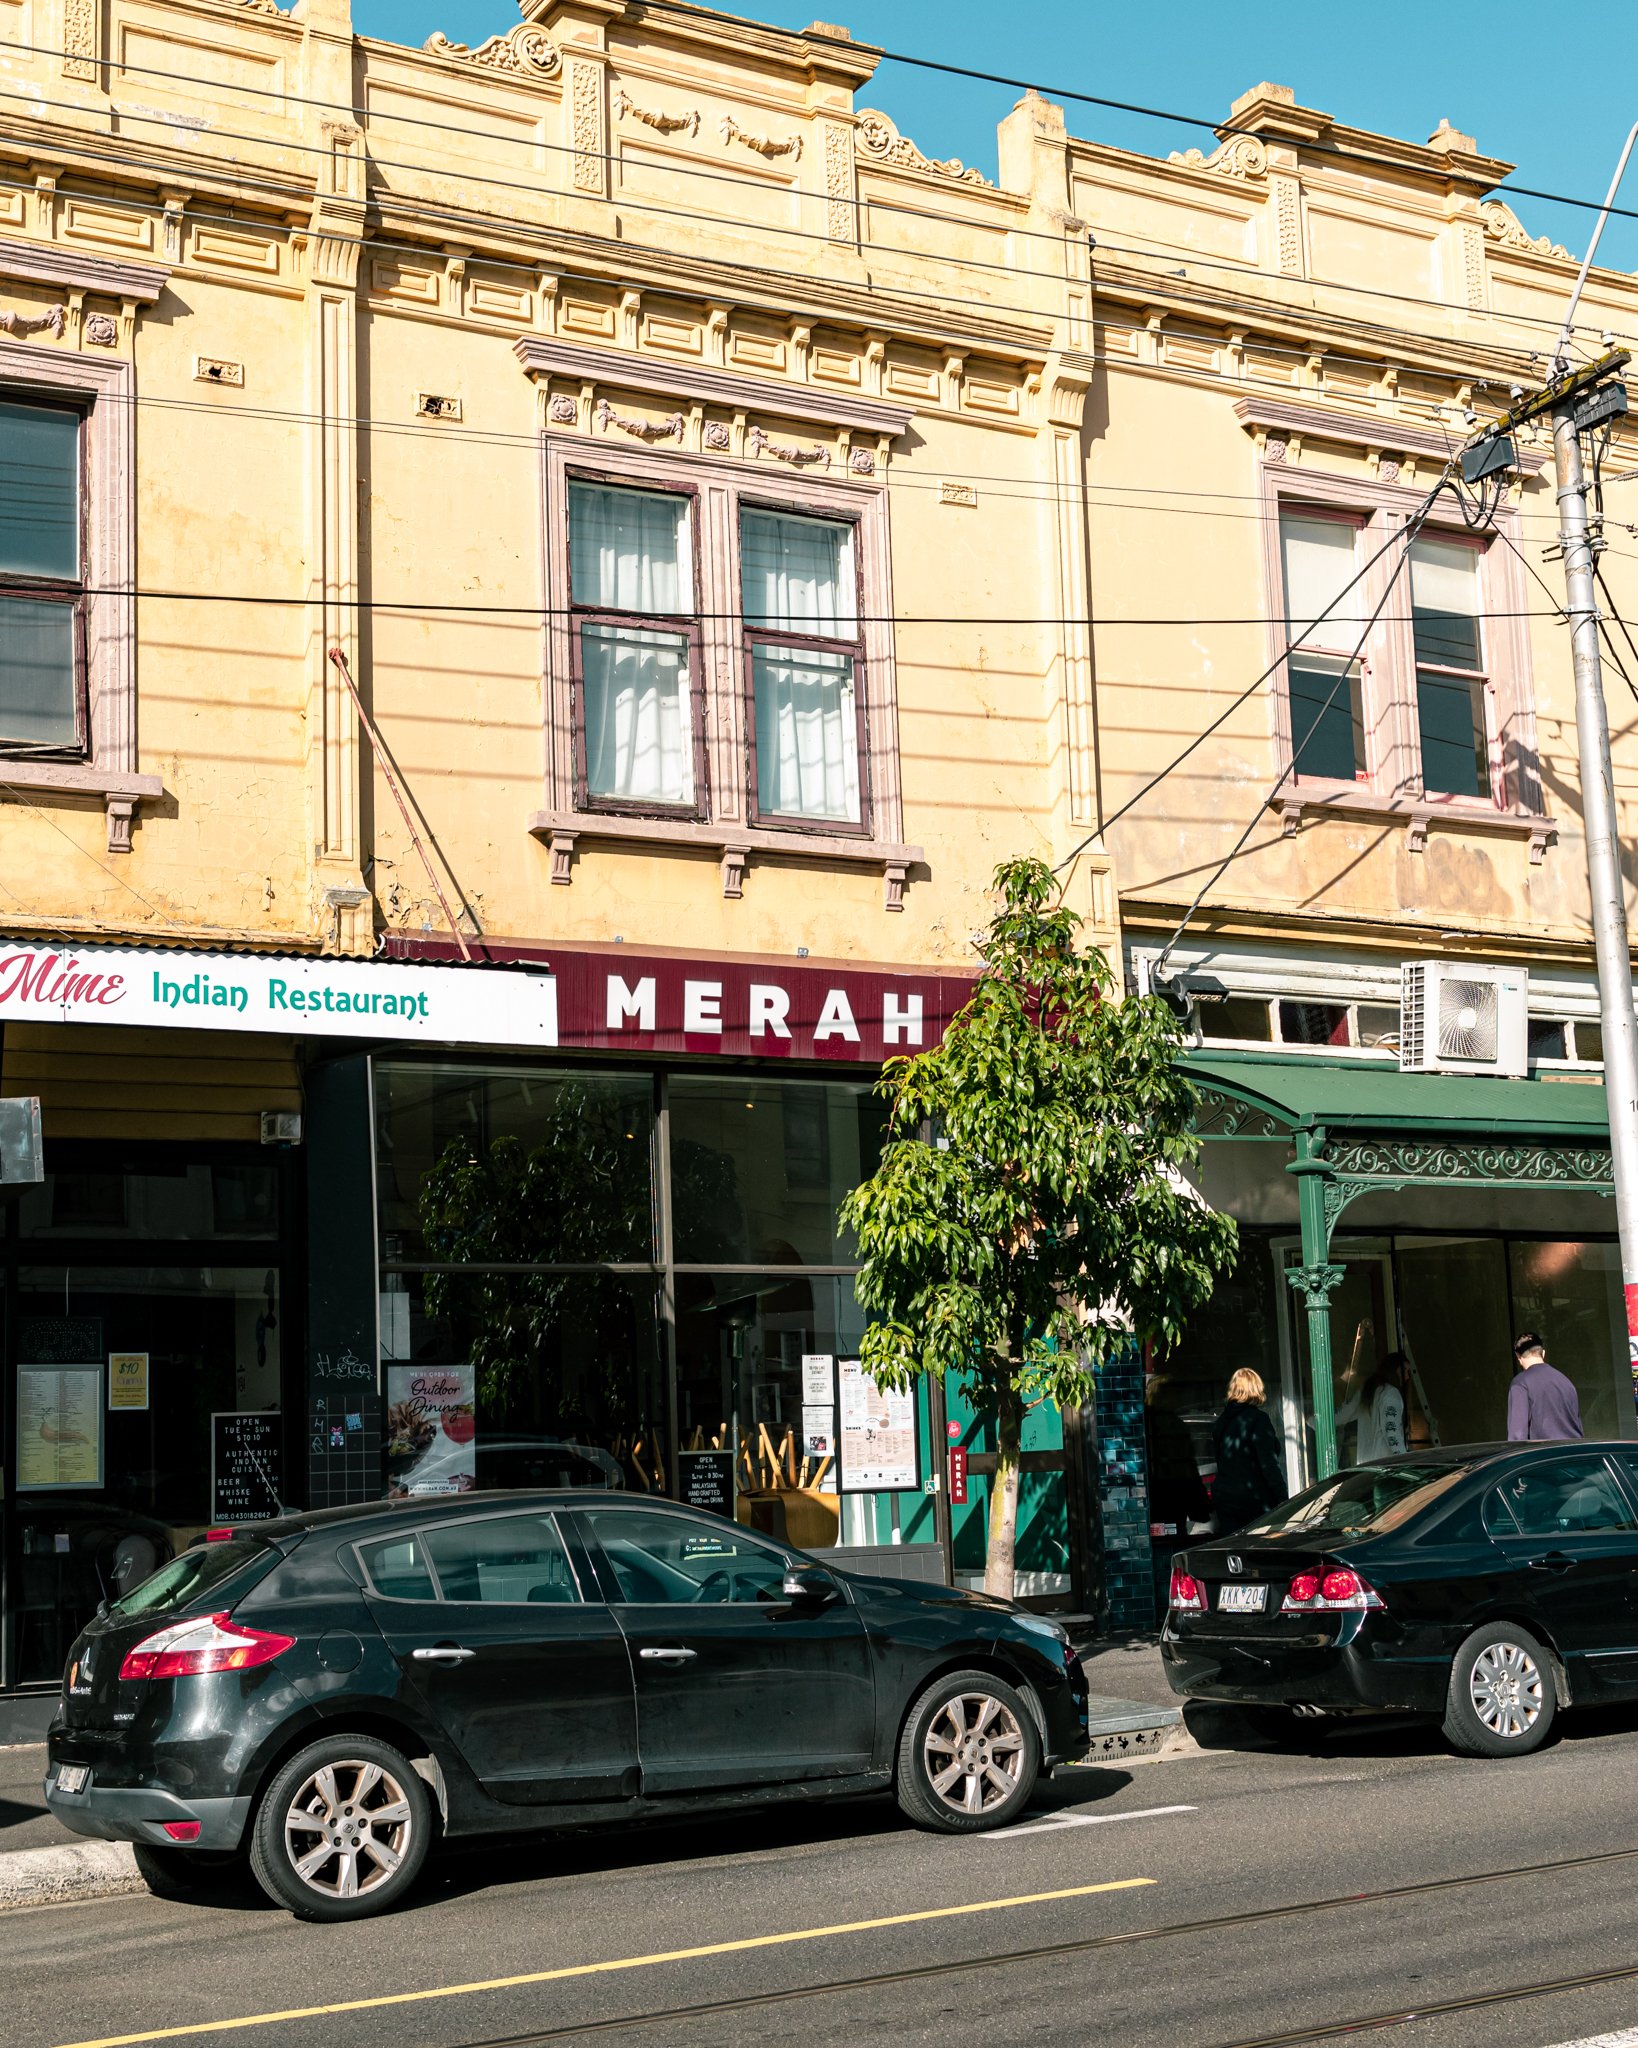 *PHONE IS NOT WORKING*

There is an issue with our phone, cannot pick up or make phone calls. So any takeaway orders or table bookings please make them via our website or email (eat@merah.com.au). Sorry for the inconvenience.